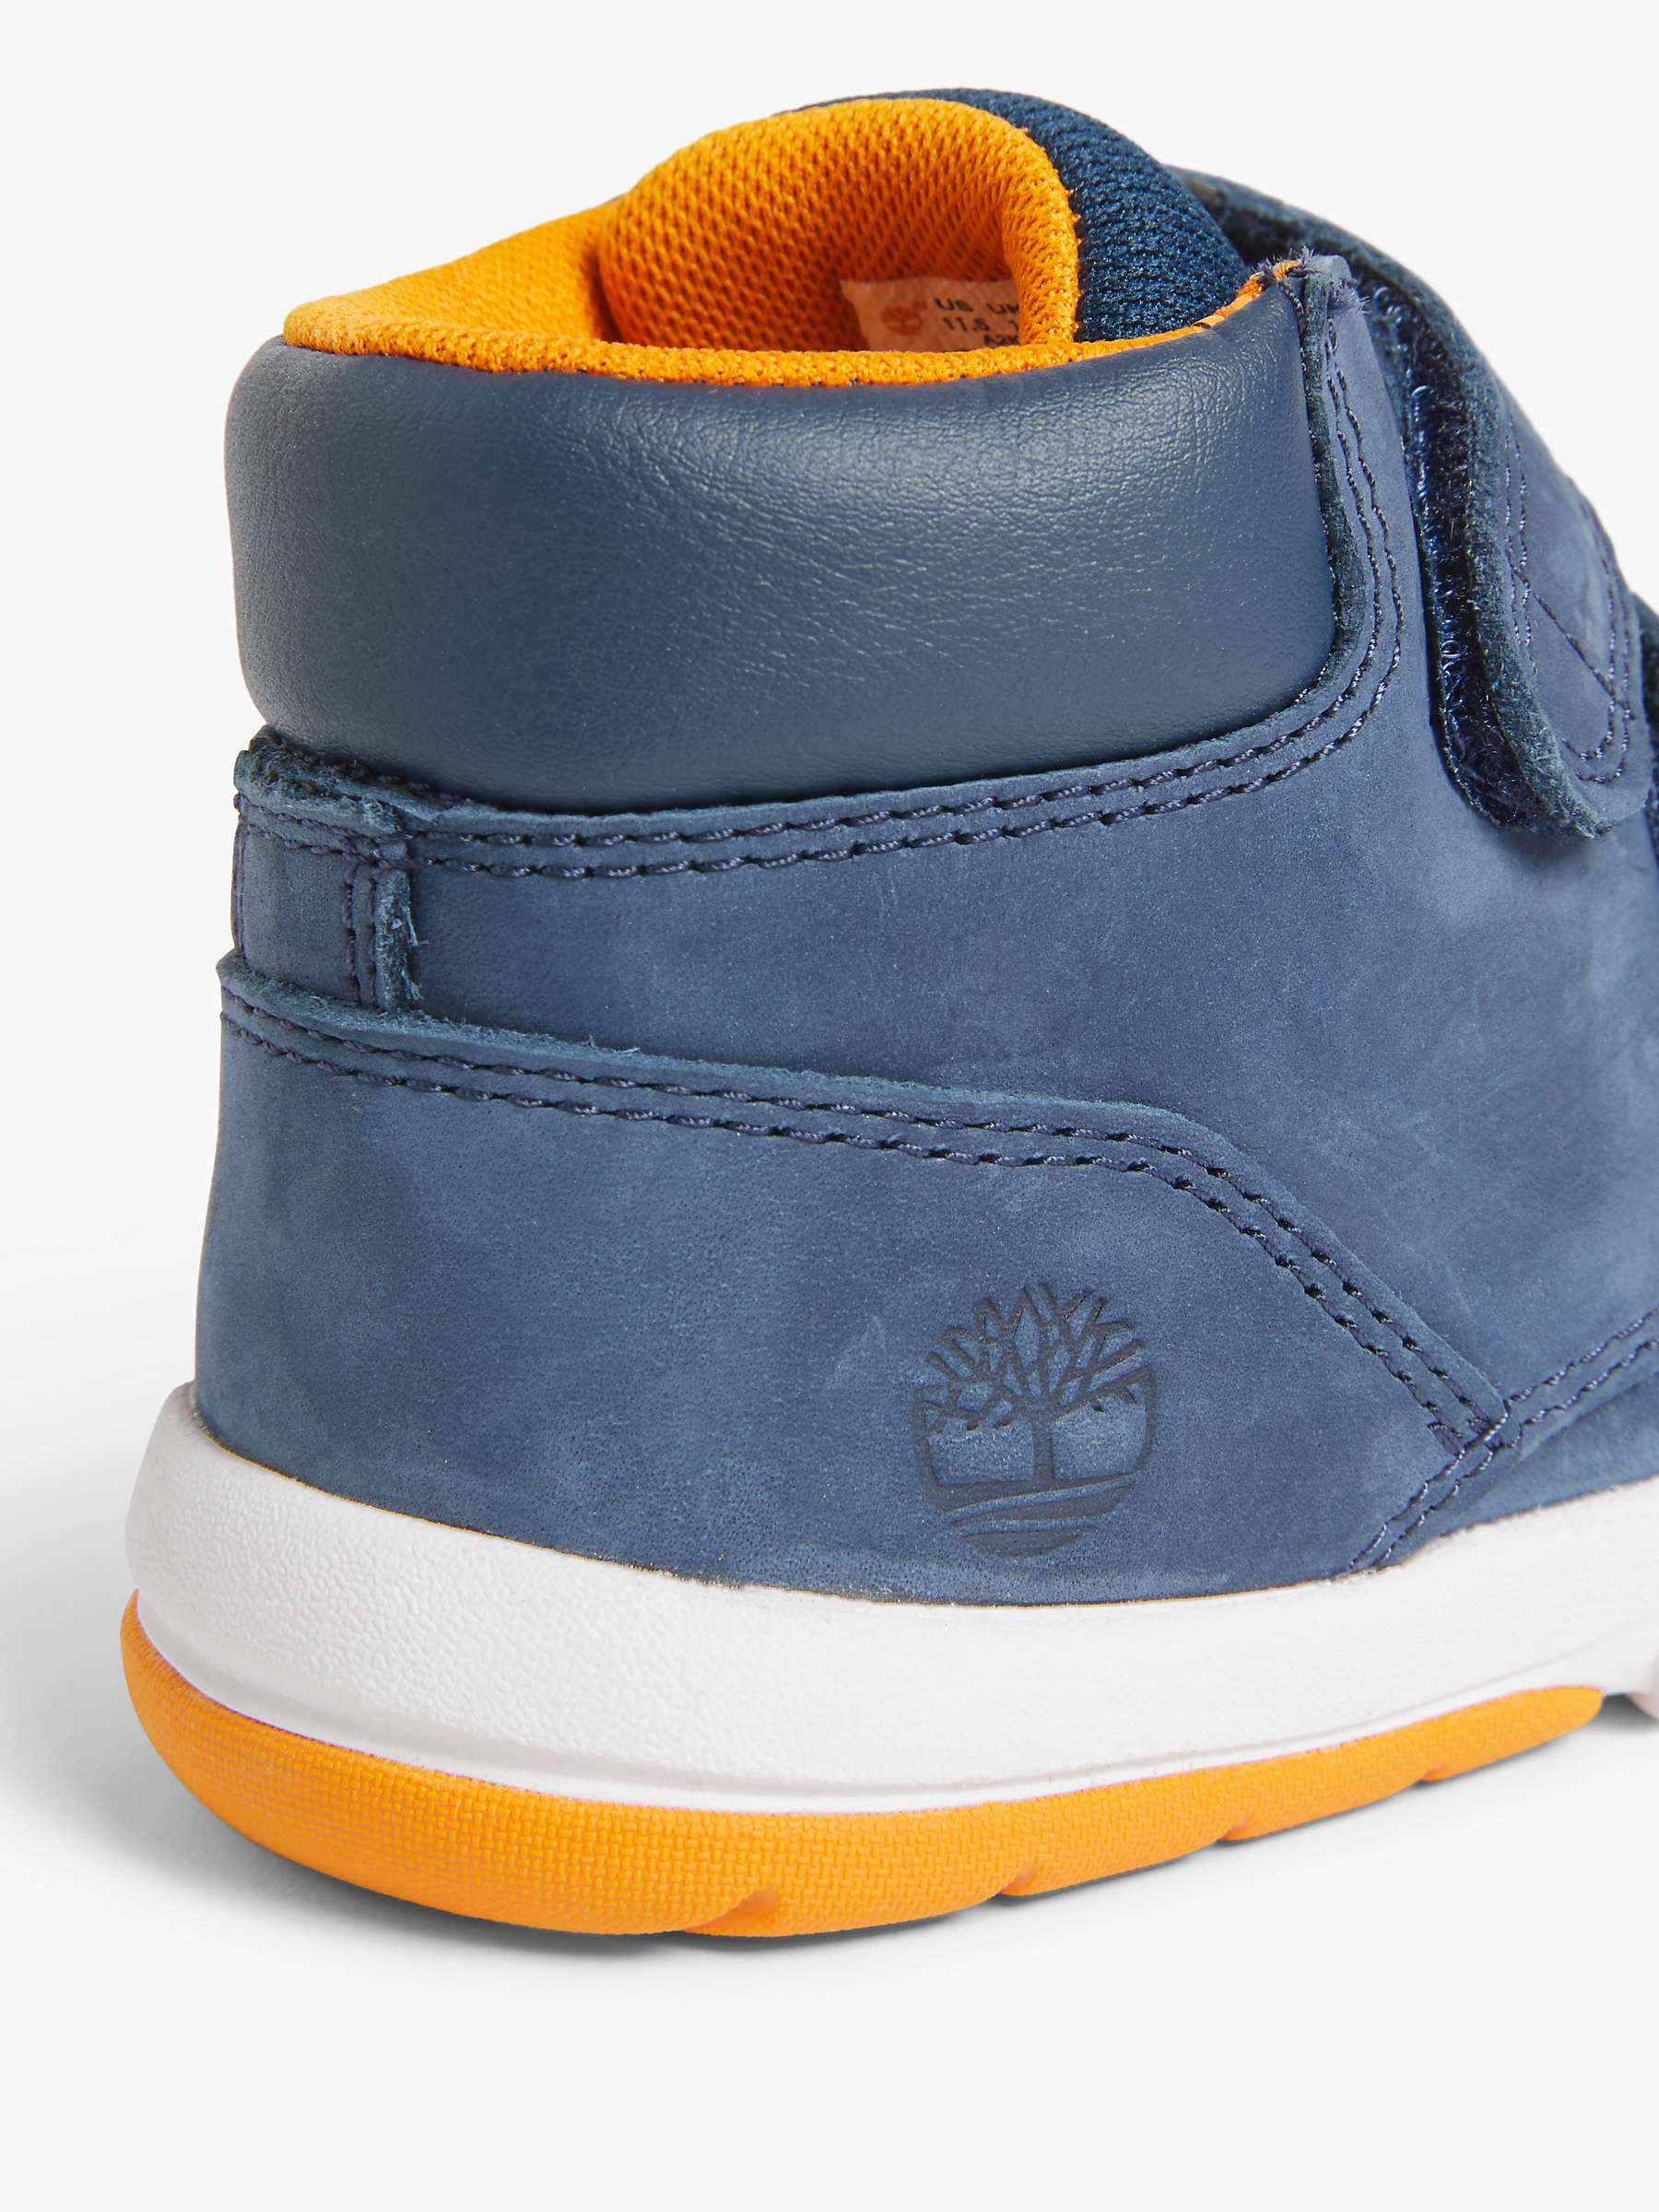 Buy Timberland Kids' Toddle Track Boots Online at johnlewis.com